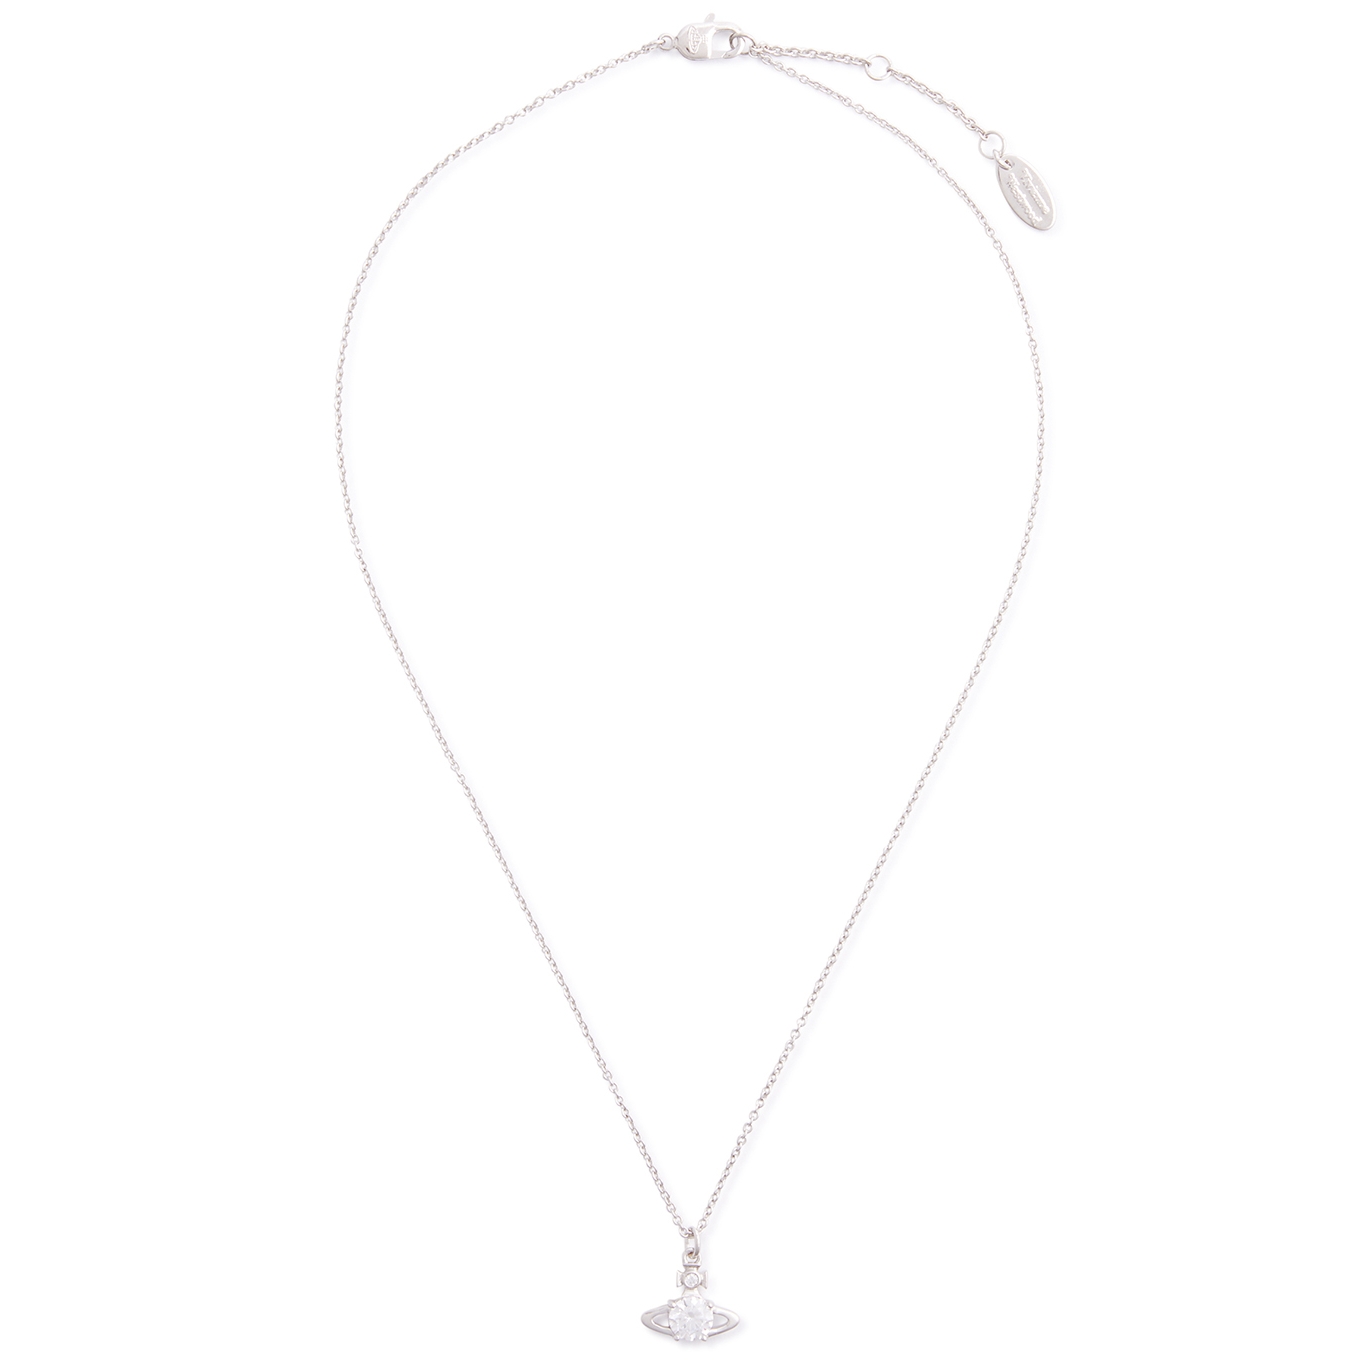 VIVIENNE WESTWOOD REINA ORB SILVER-PLATED NECKLACE